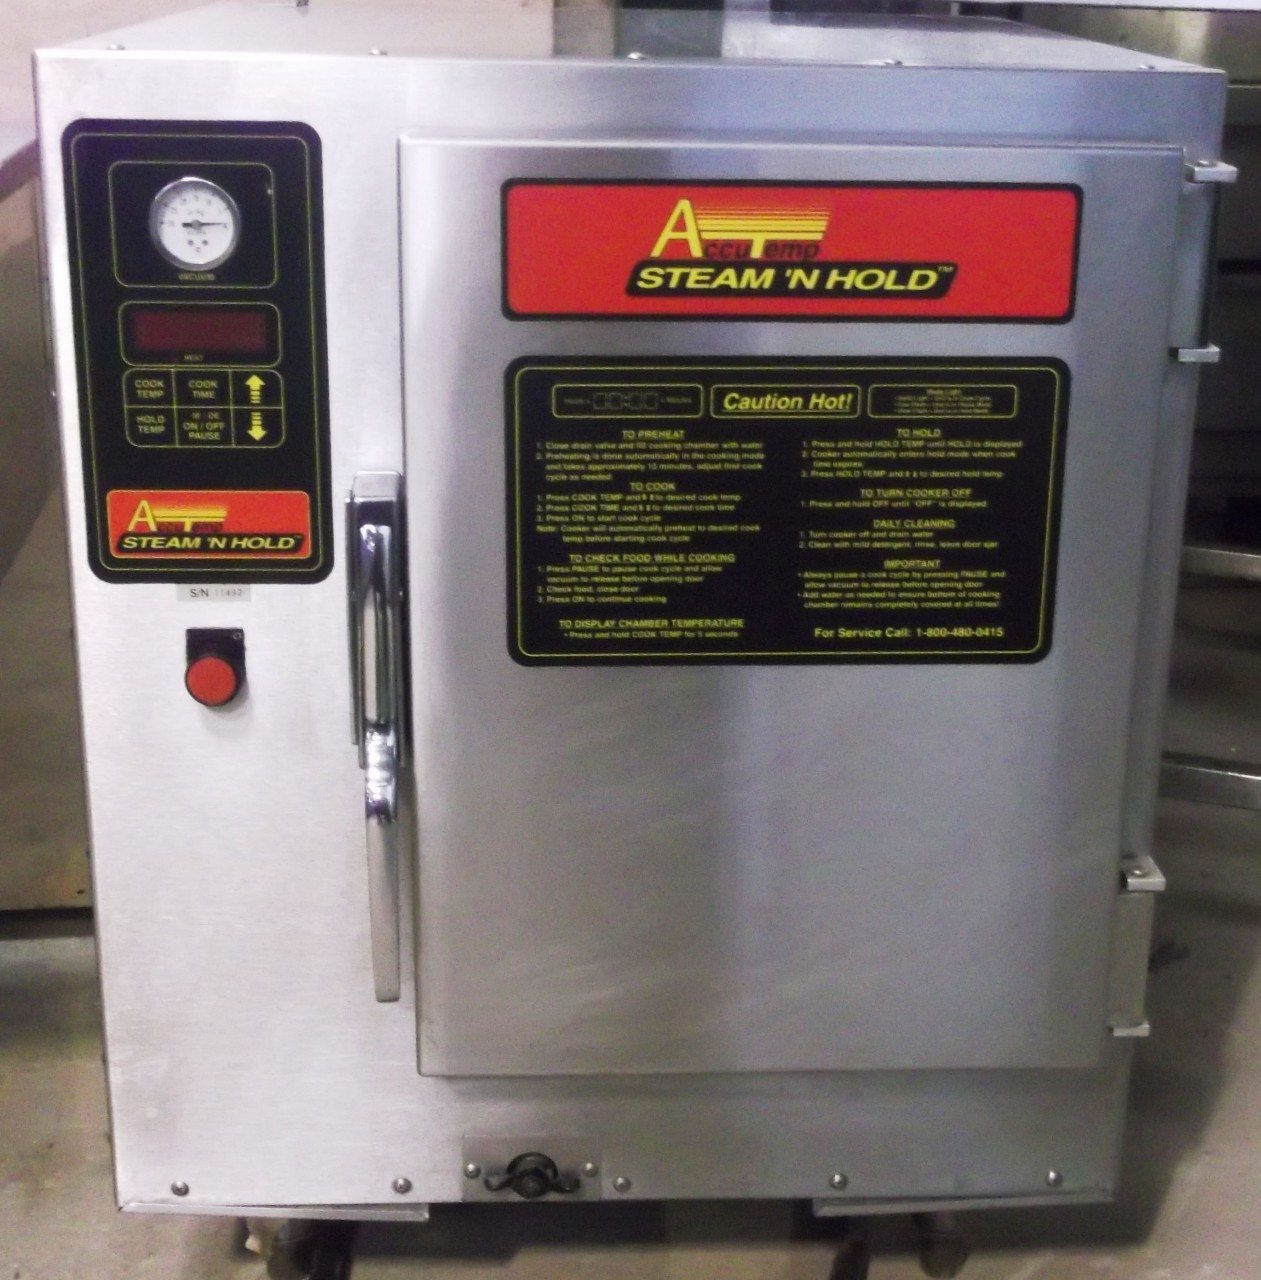 ACCUTEMP Steam N Hold Counter Top Oven